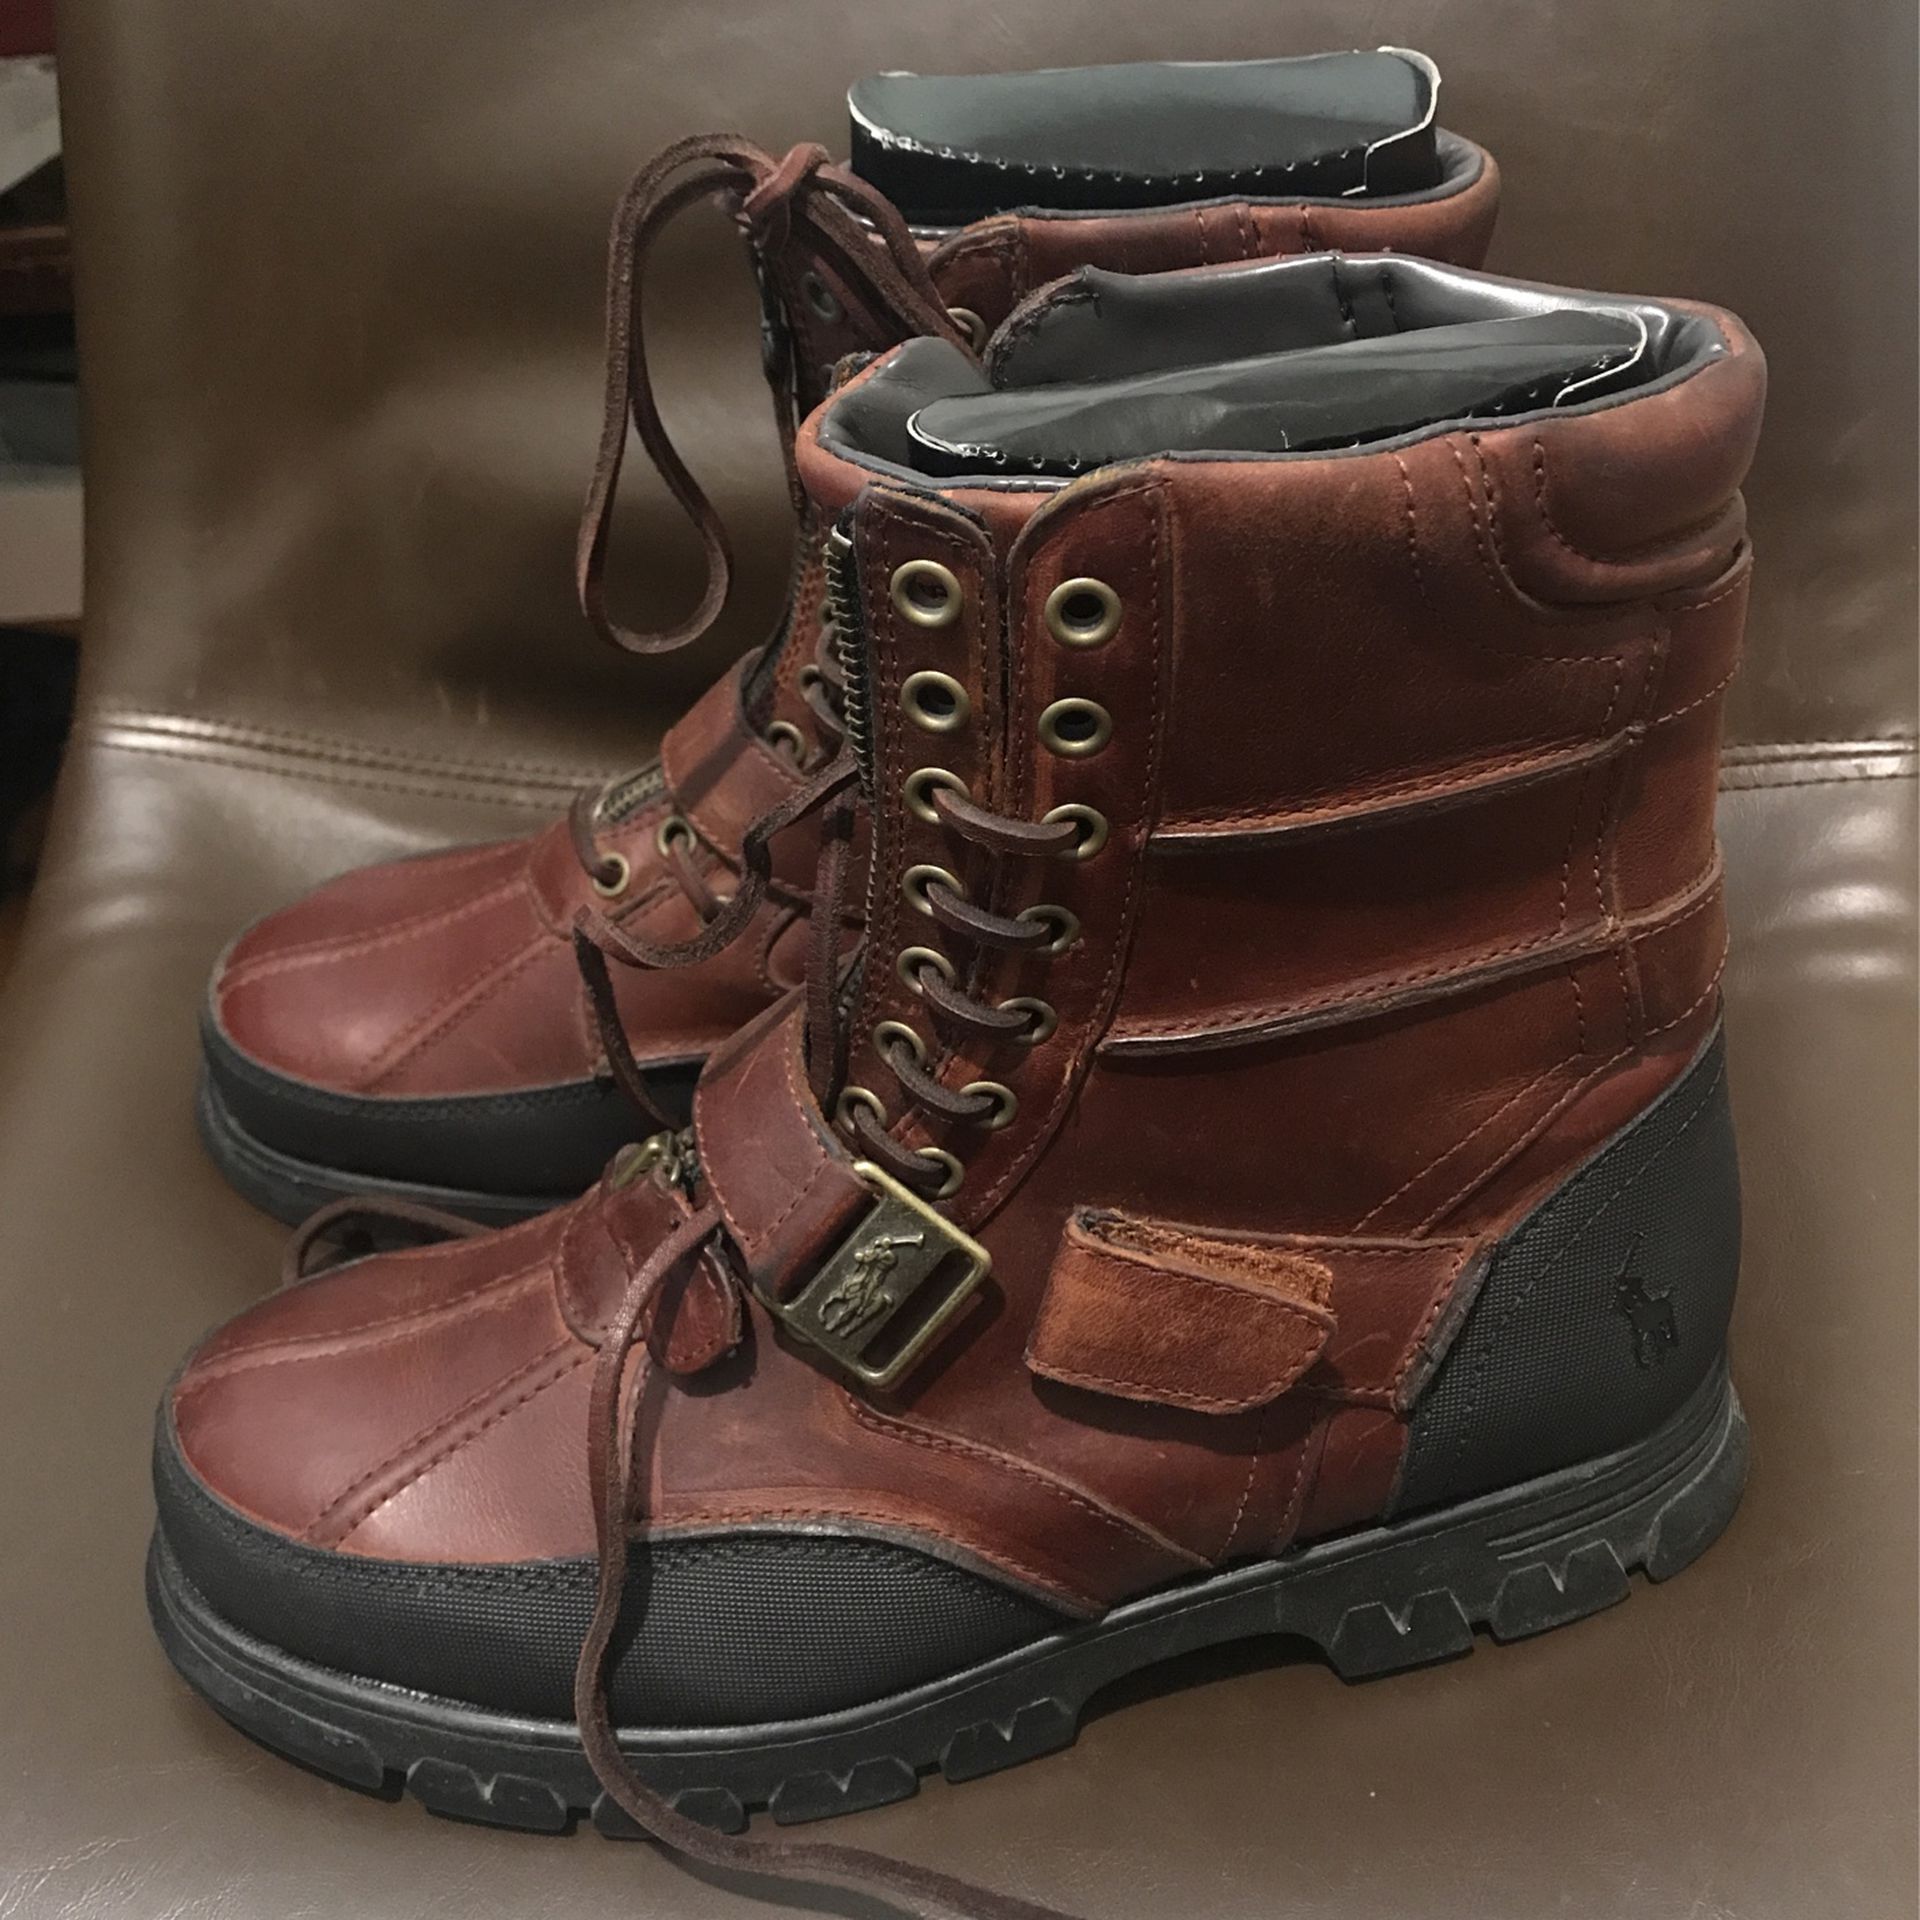 Polo By Ralph Lauren Burgundy Leather Boots Size 9